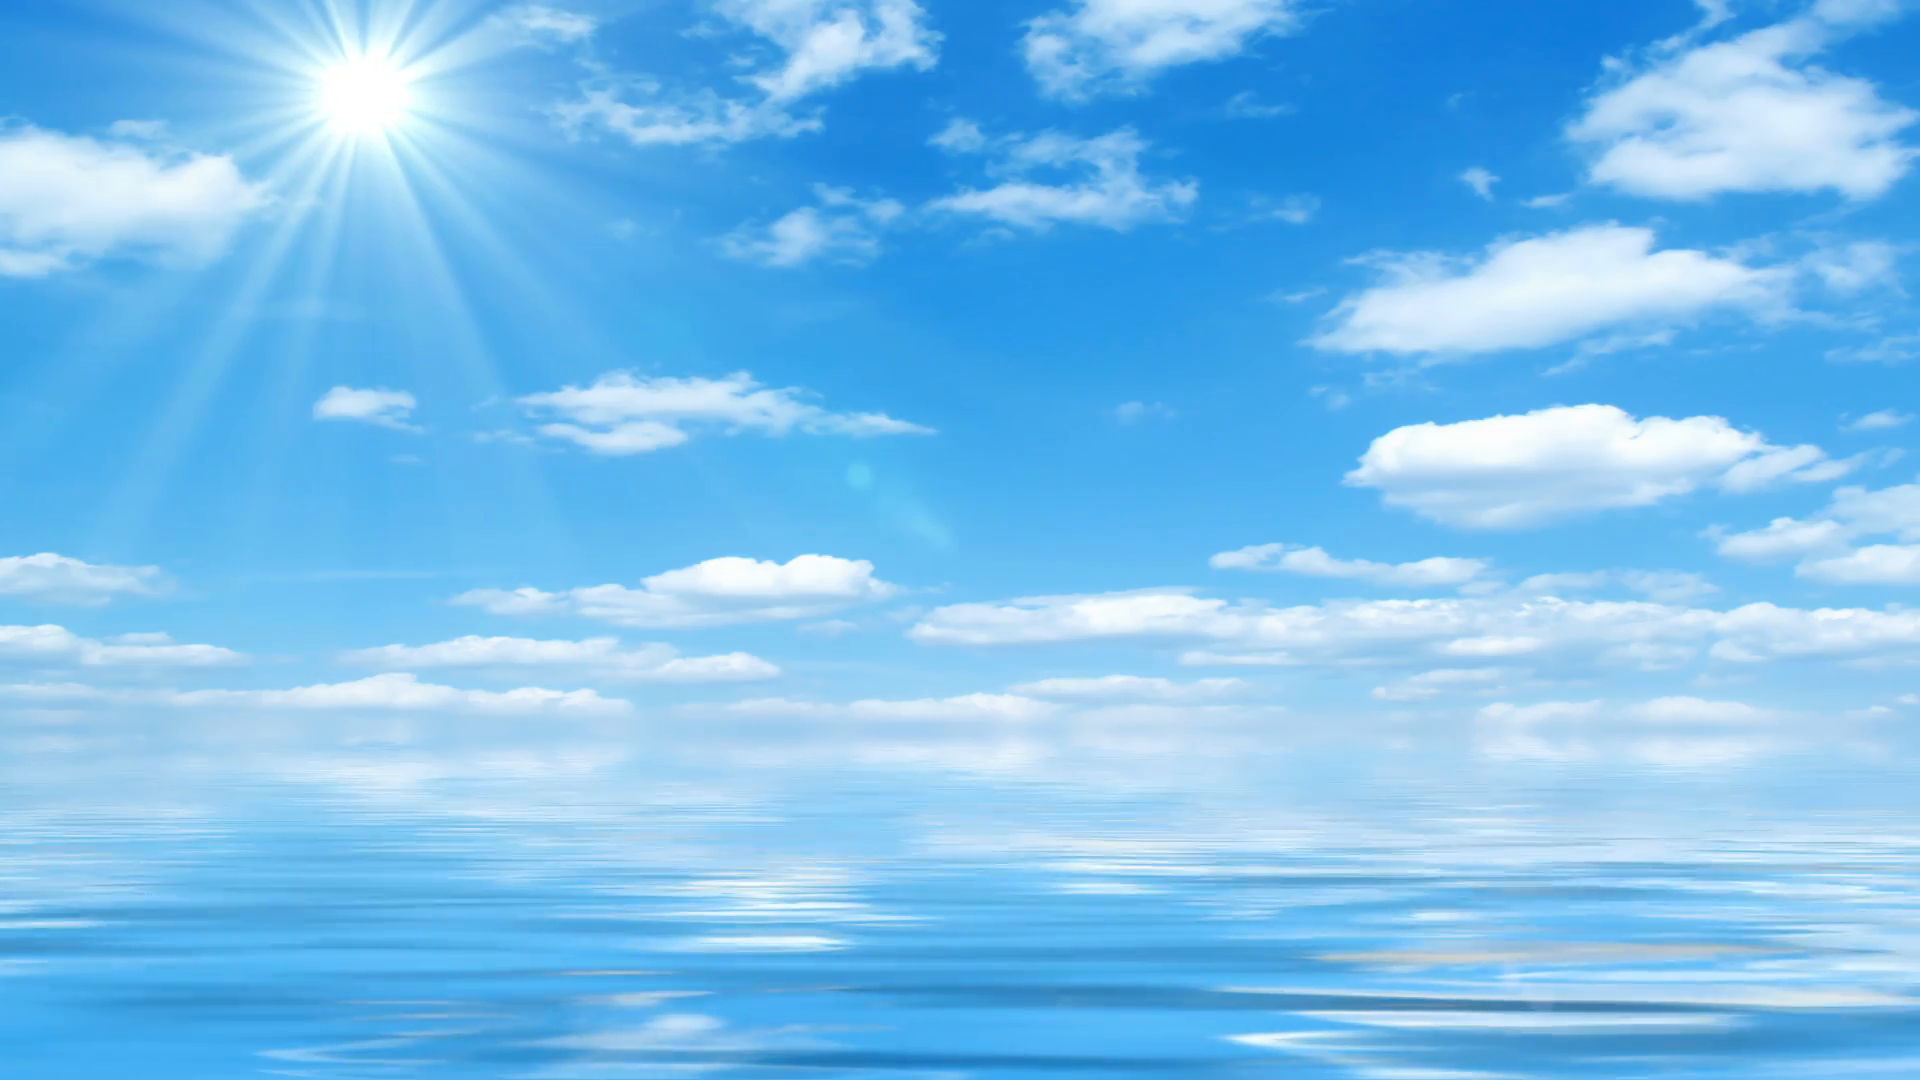 Sunny Sky Png - Beautiful Sea On Sunny Day With Blue Sky Reflecting In Water   Beautiful Sea Horizon, Sunshine, Blue Sky With Fluffy Clouds And Water Reflection., Transparent background PNG HD thumbnail